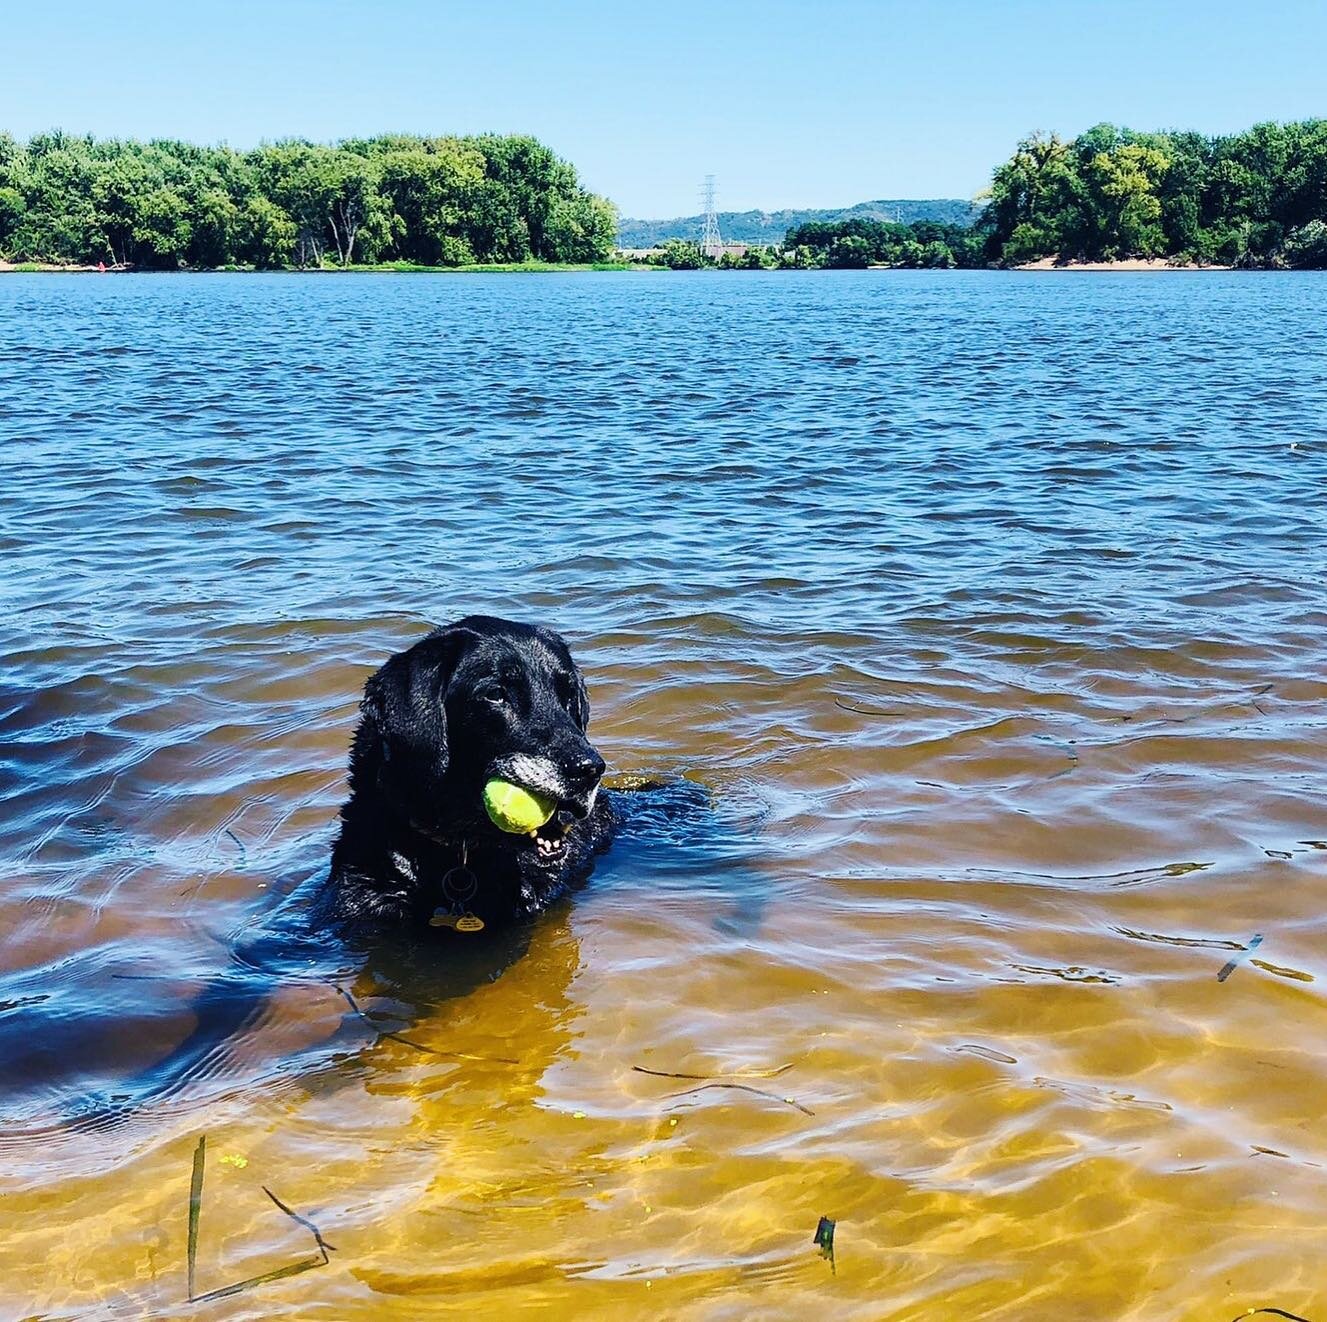 This is ME swimming in the Mighty Mississippi when I was 14. What are all you fine DOGS up to this weekend? #doglife #blacklablife